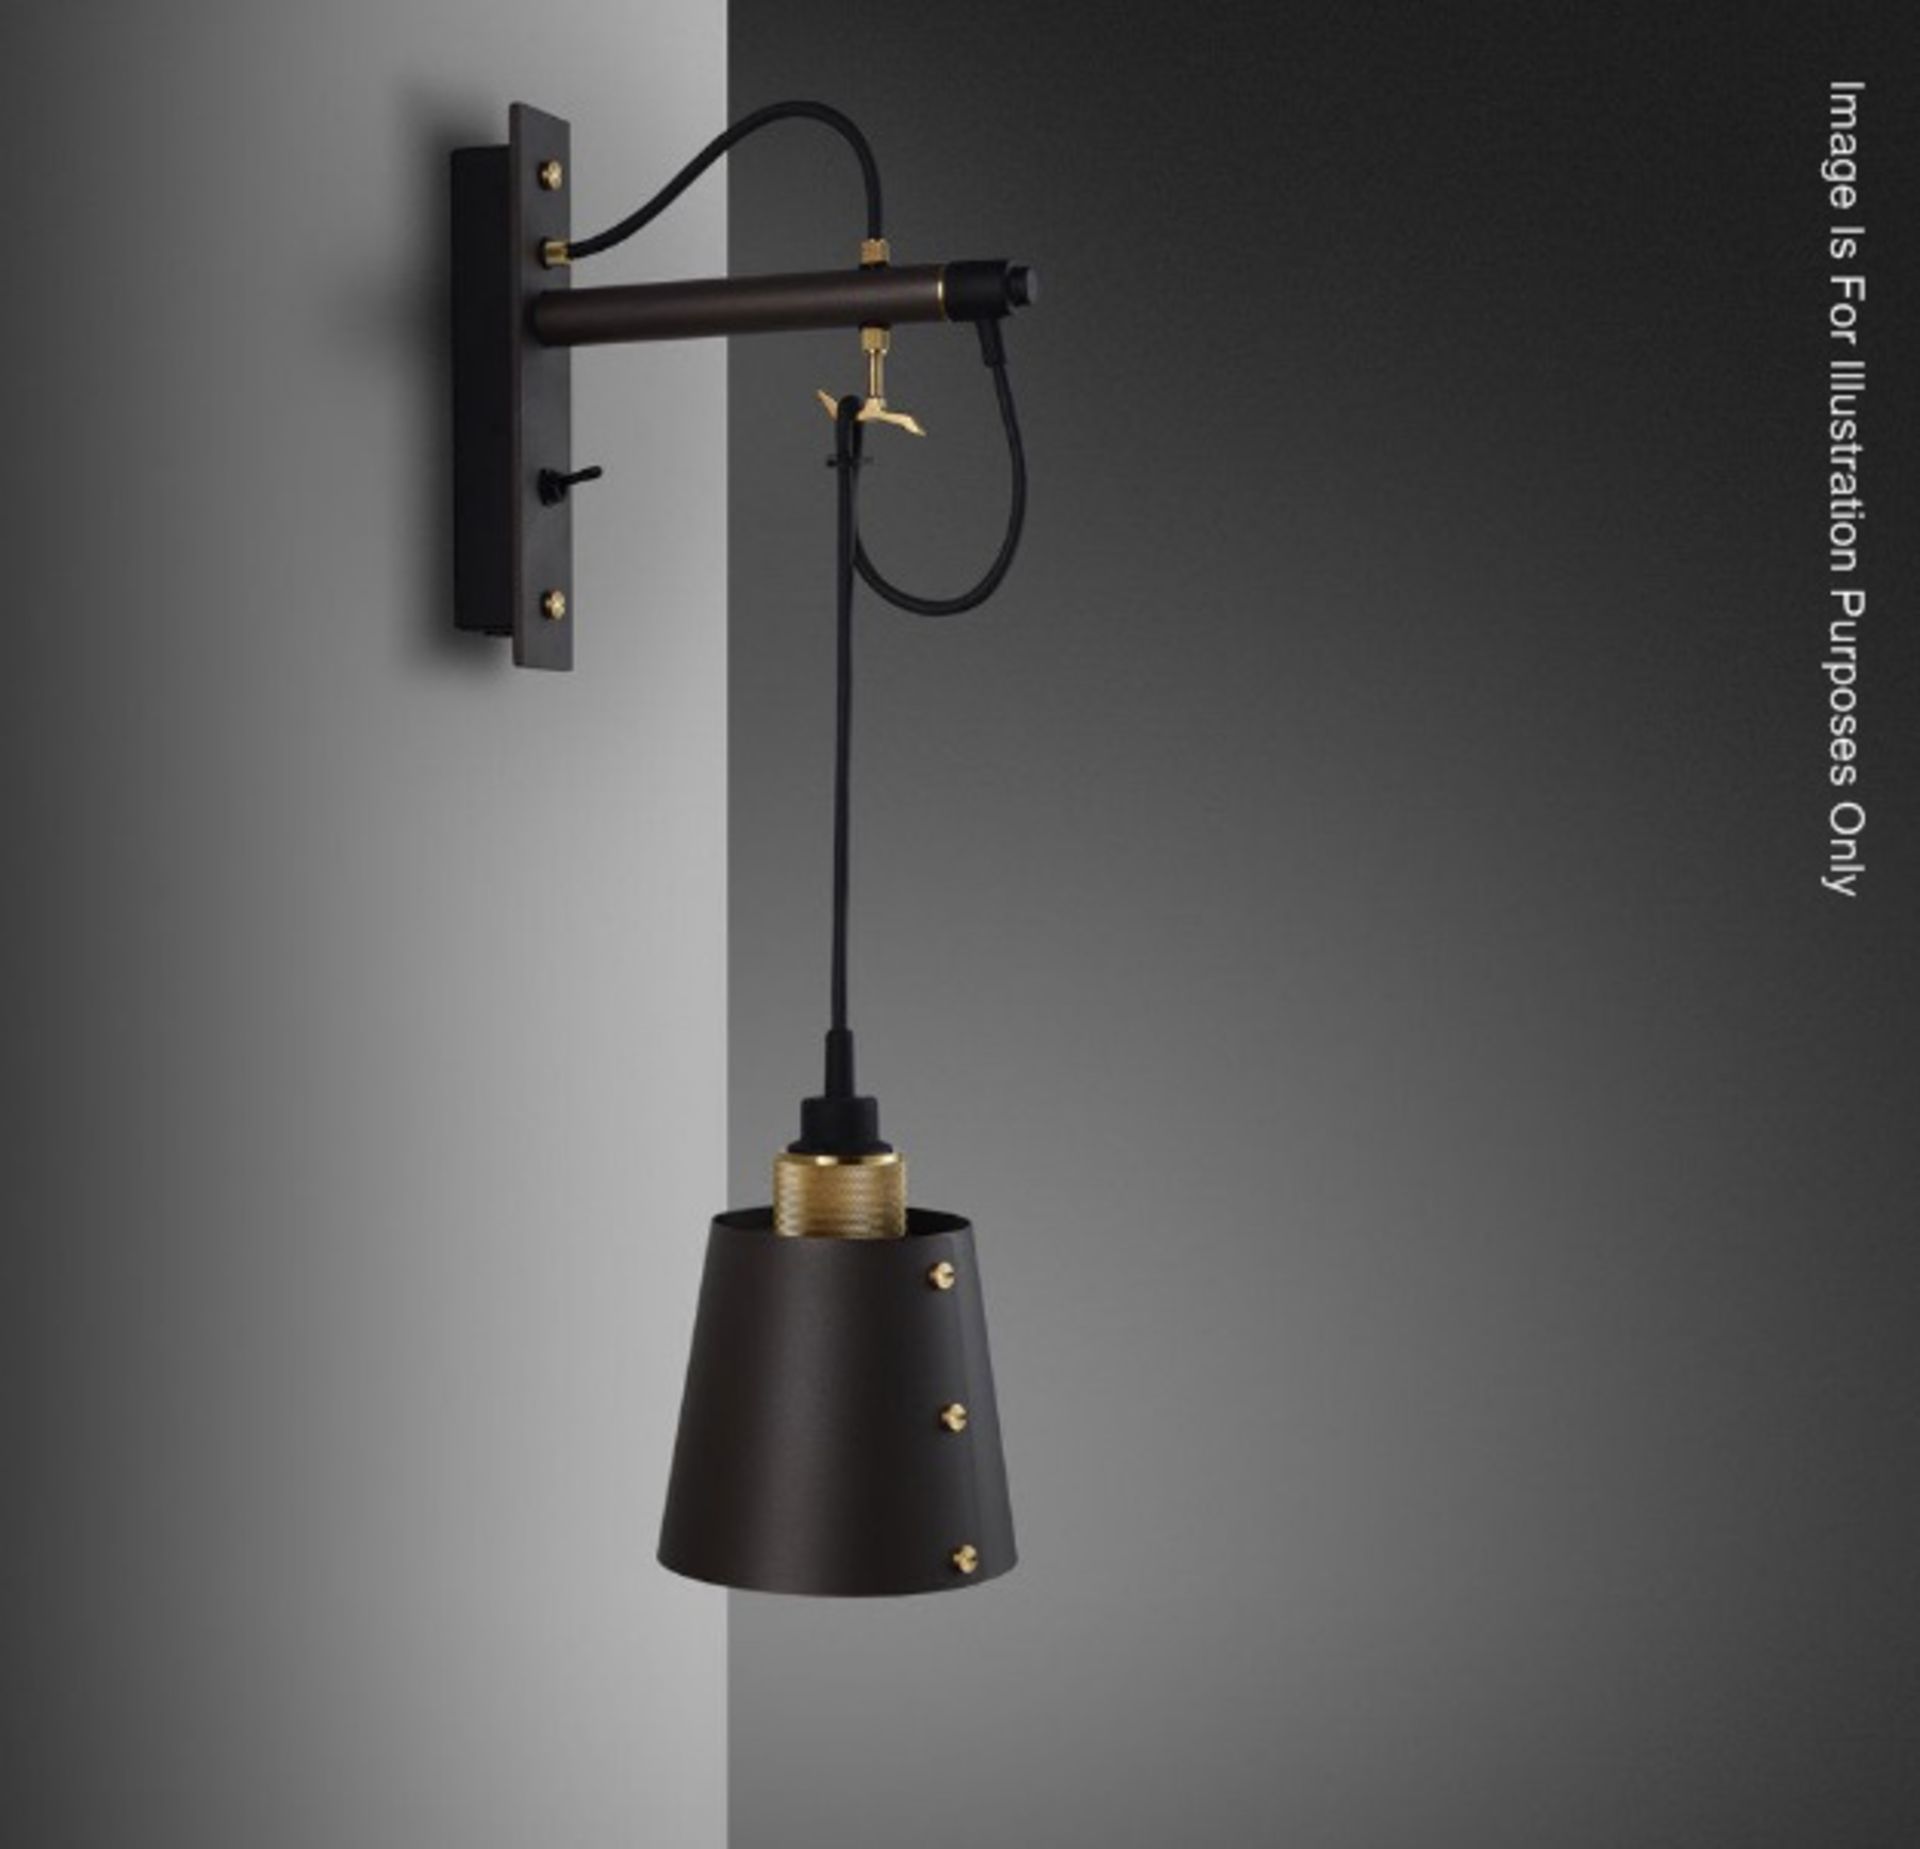 1 x BUSTER + PUNCH Hooked Wall Light With Metal Shade - Ref: WS/FF160F - CL204 - Location: London Ci